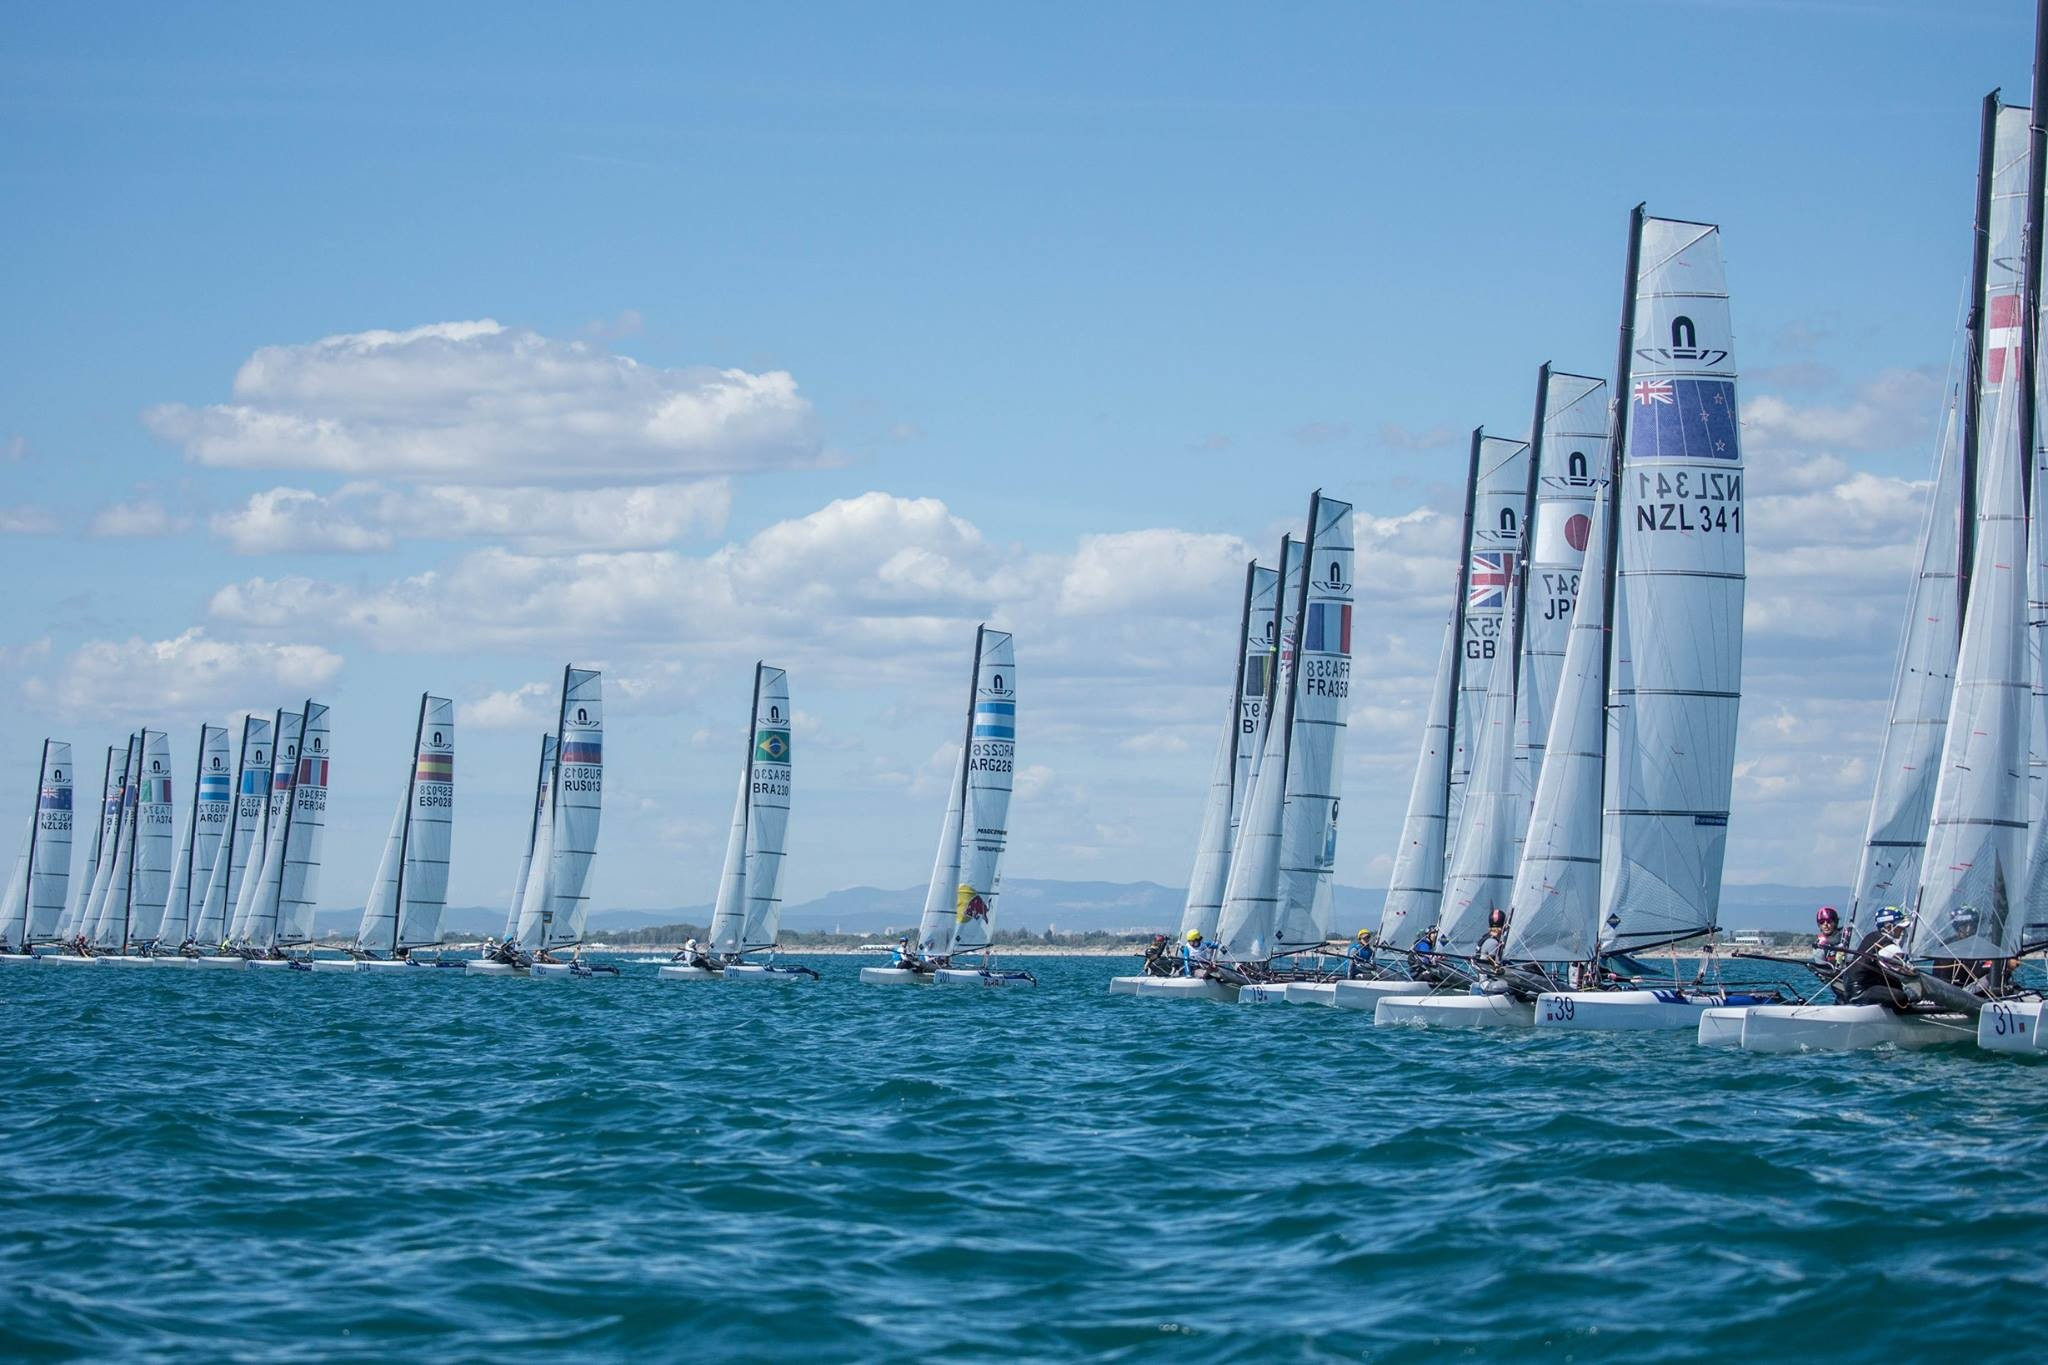 The opening day of the Nacra 17 World Championships took place Aigues Mortes in France ©Facebook